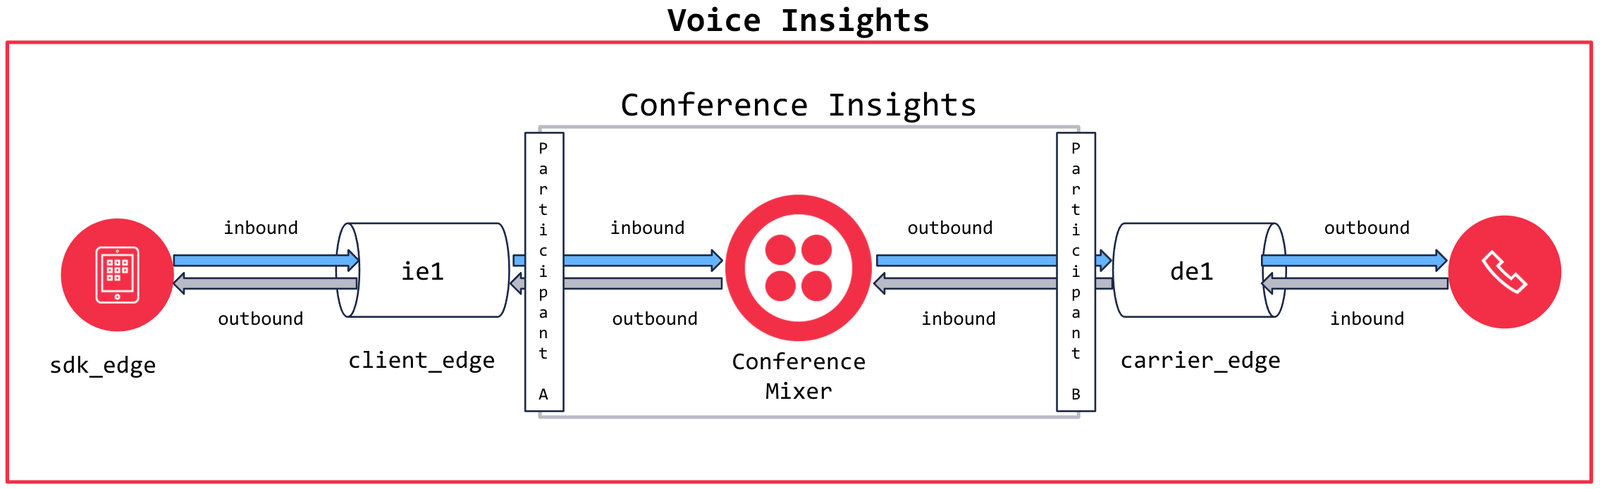 Conference Insights Media Path.